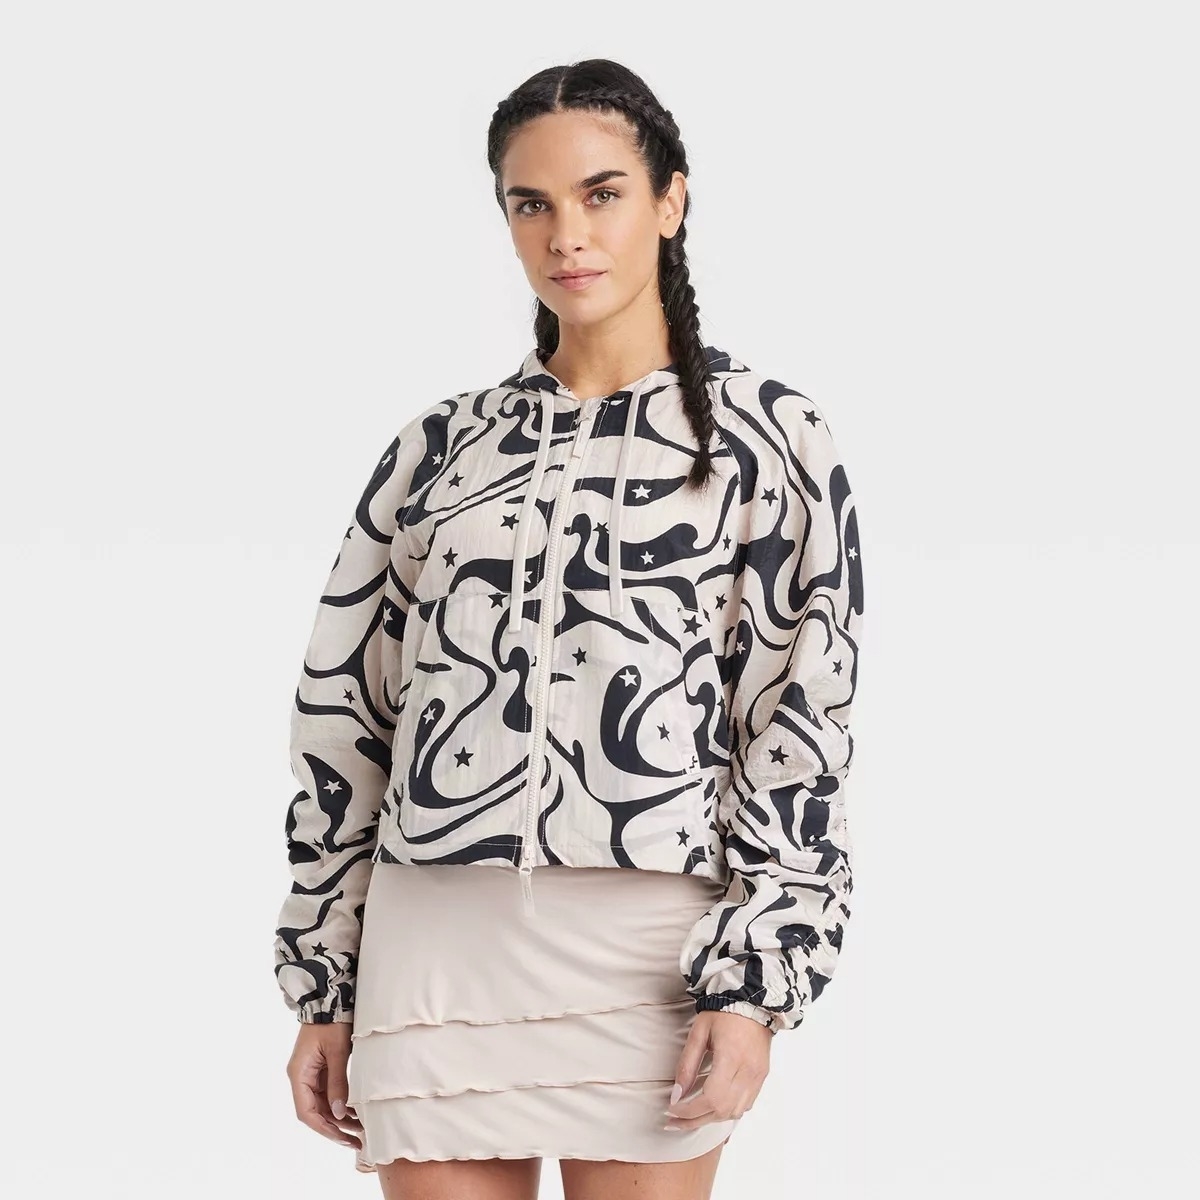 Model in the black and white zip up windbreaker, patterned with swirls and small black stars